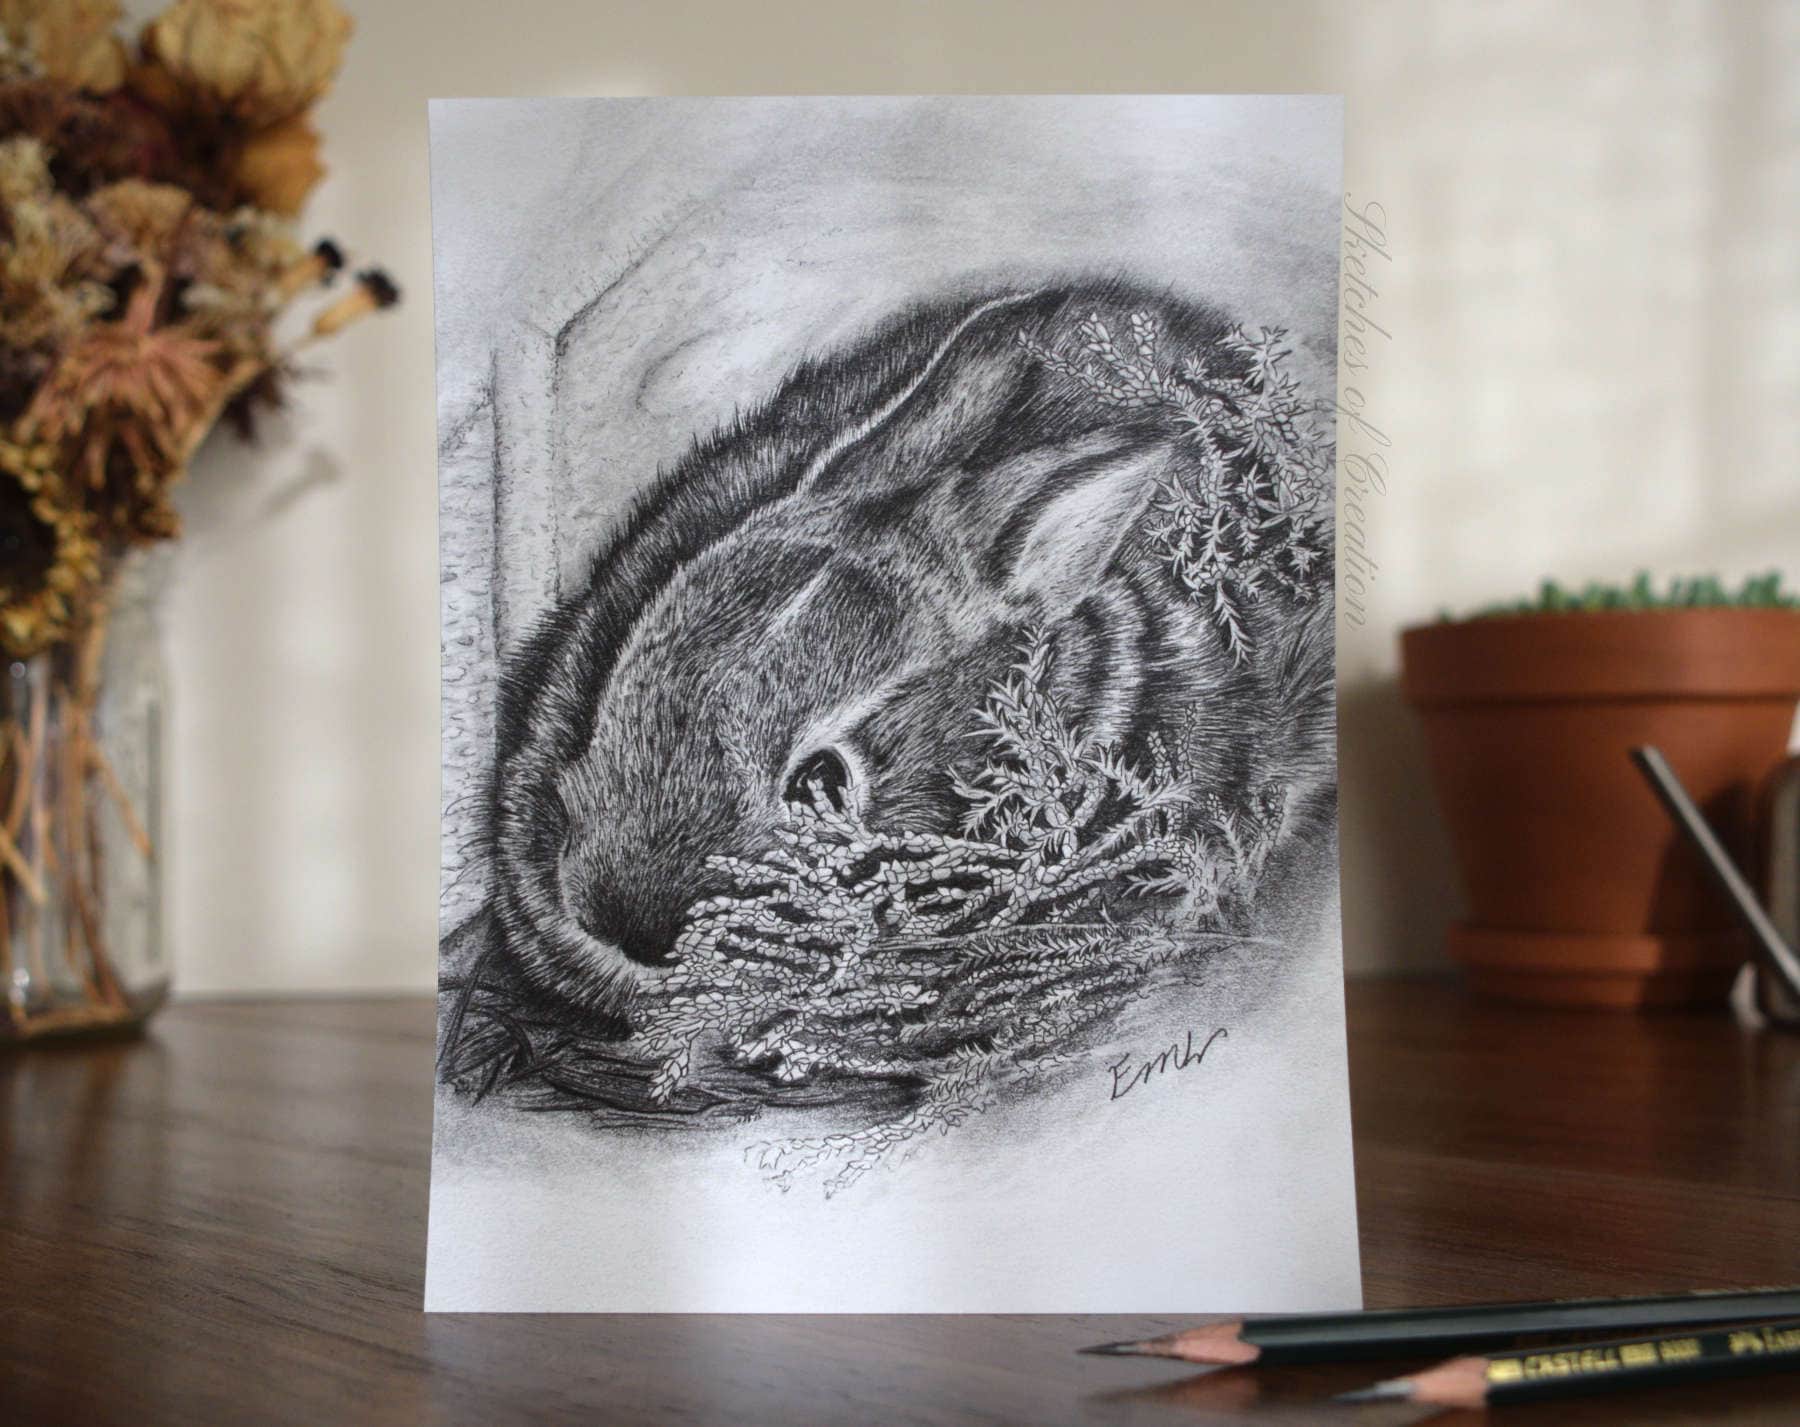 A print of a baby bunny